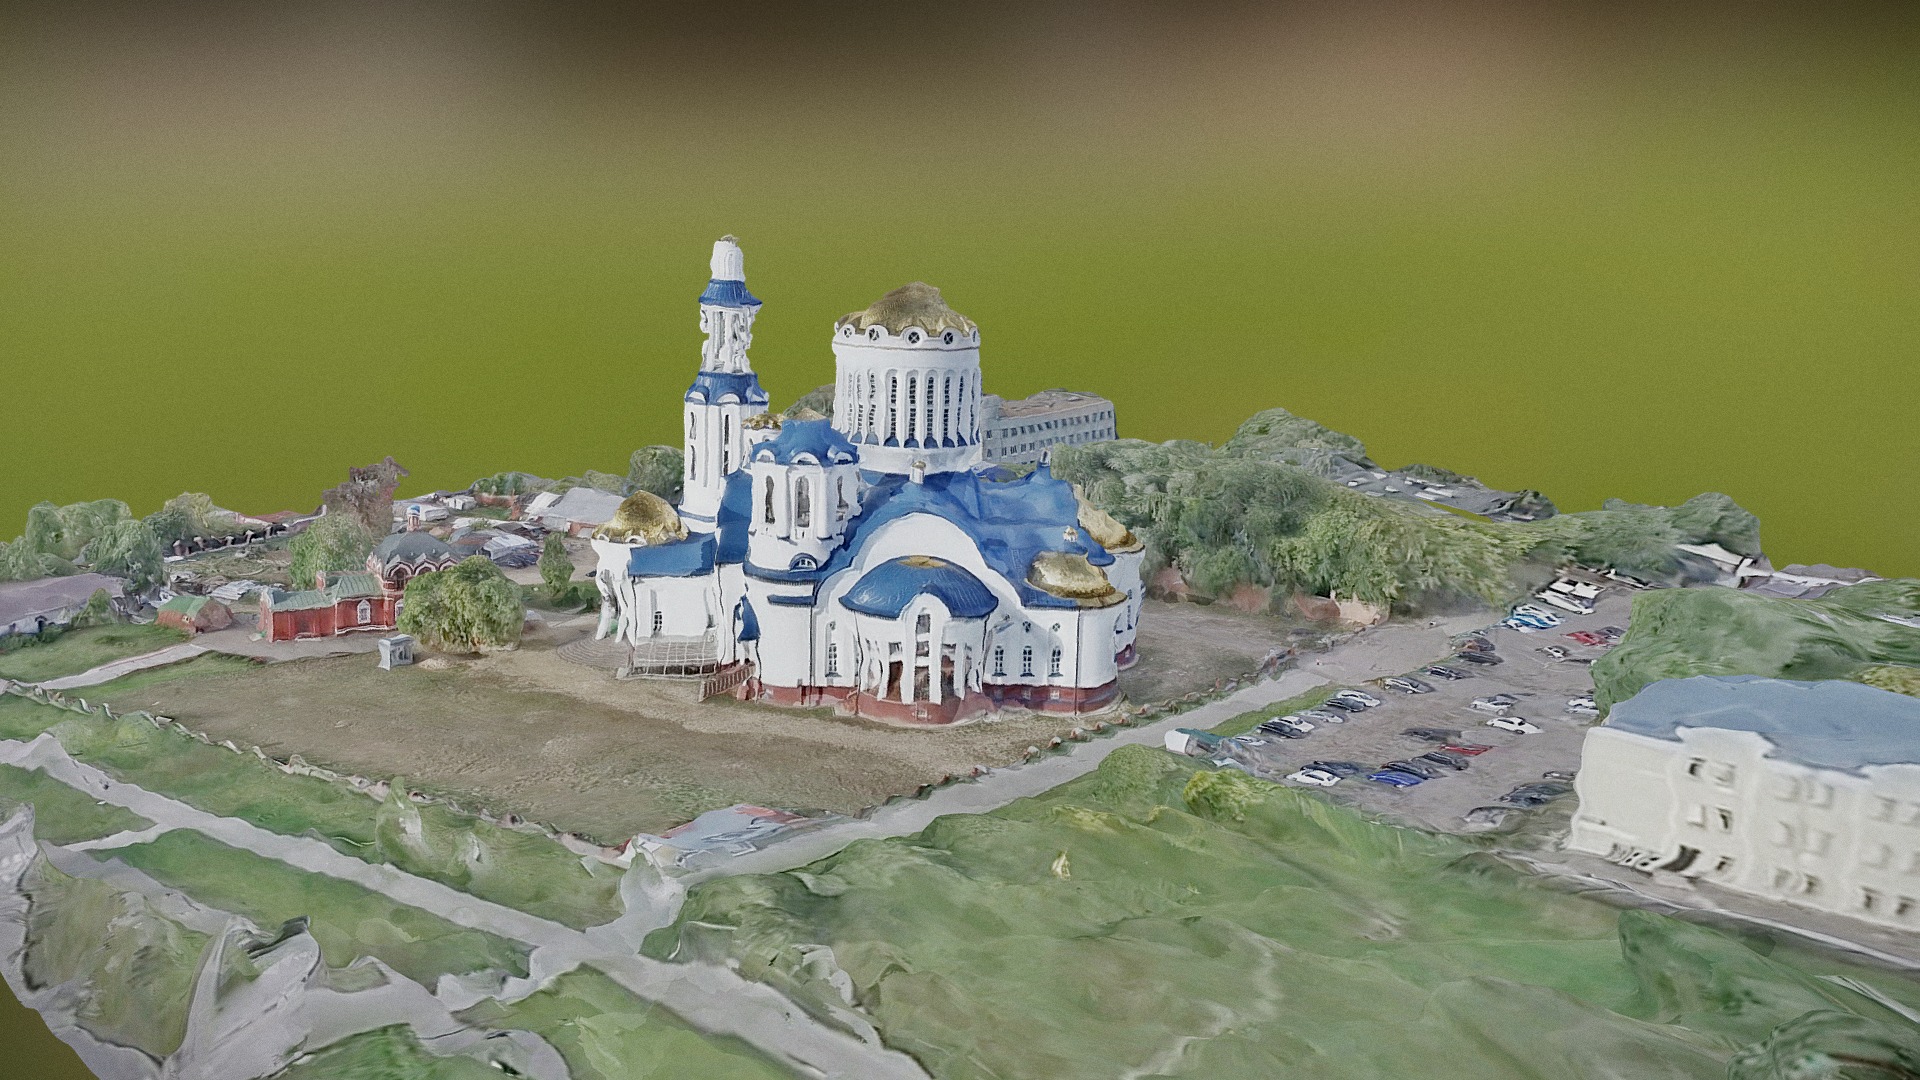 3D model Bibirevo Church - This is a 3D model of the Bibirevo Church. The 3D model is about a building on a hill.